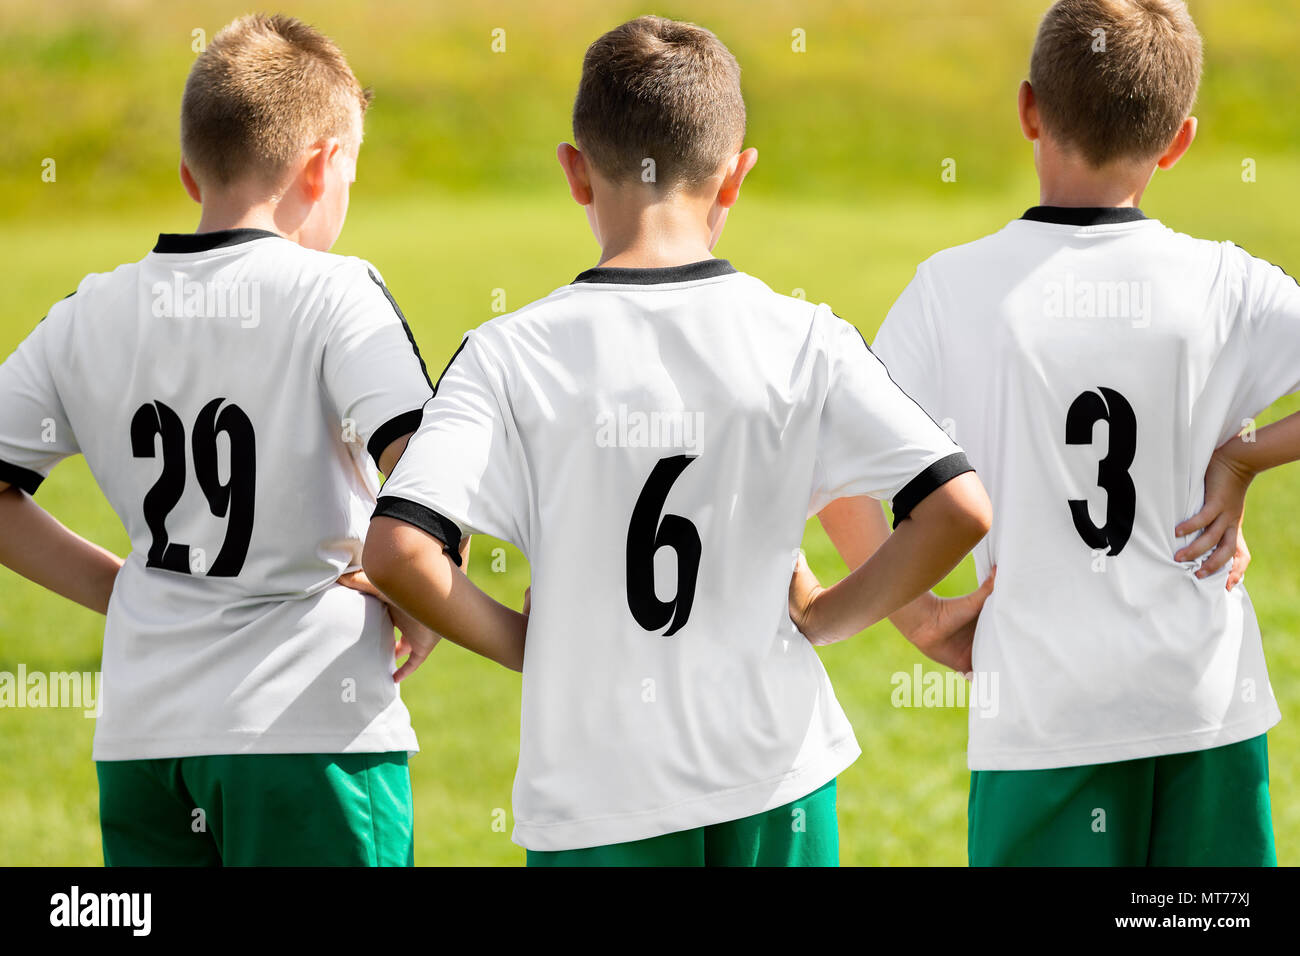 Children Sports Team Wearing White Soccer Jersey Shirts. Young Boys Watching Soccer Match. Football Tournament Competition in the Background. Kids Foo Stock Photo